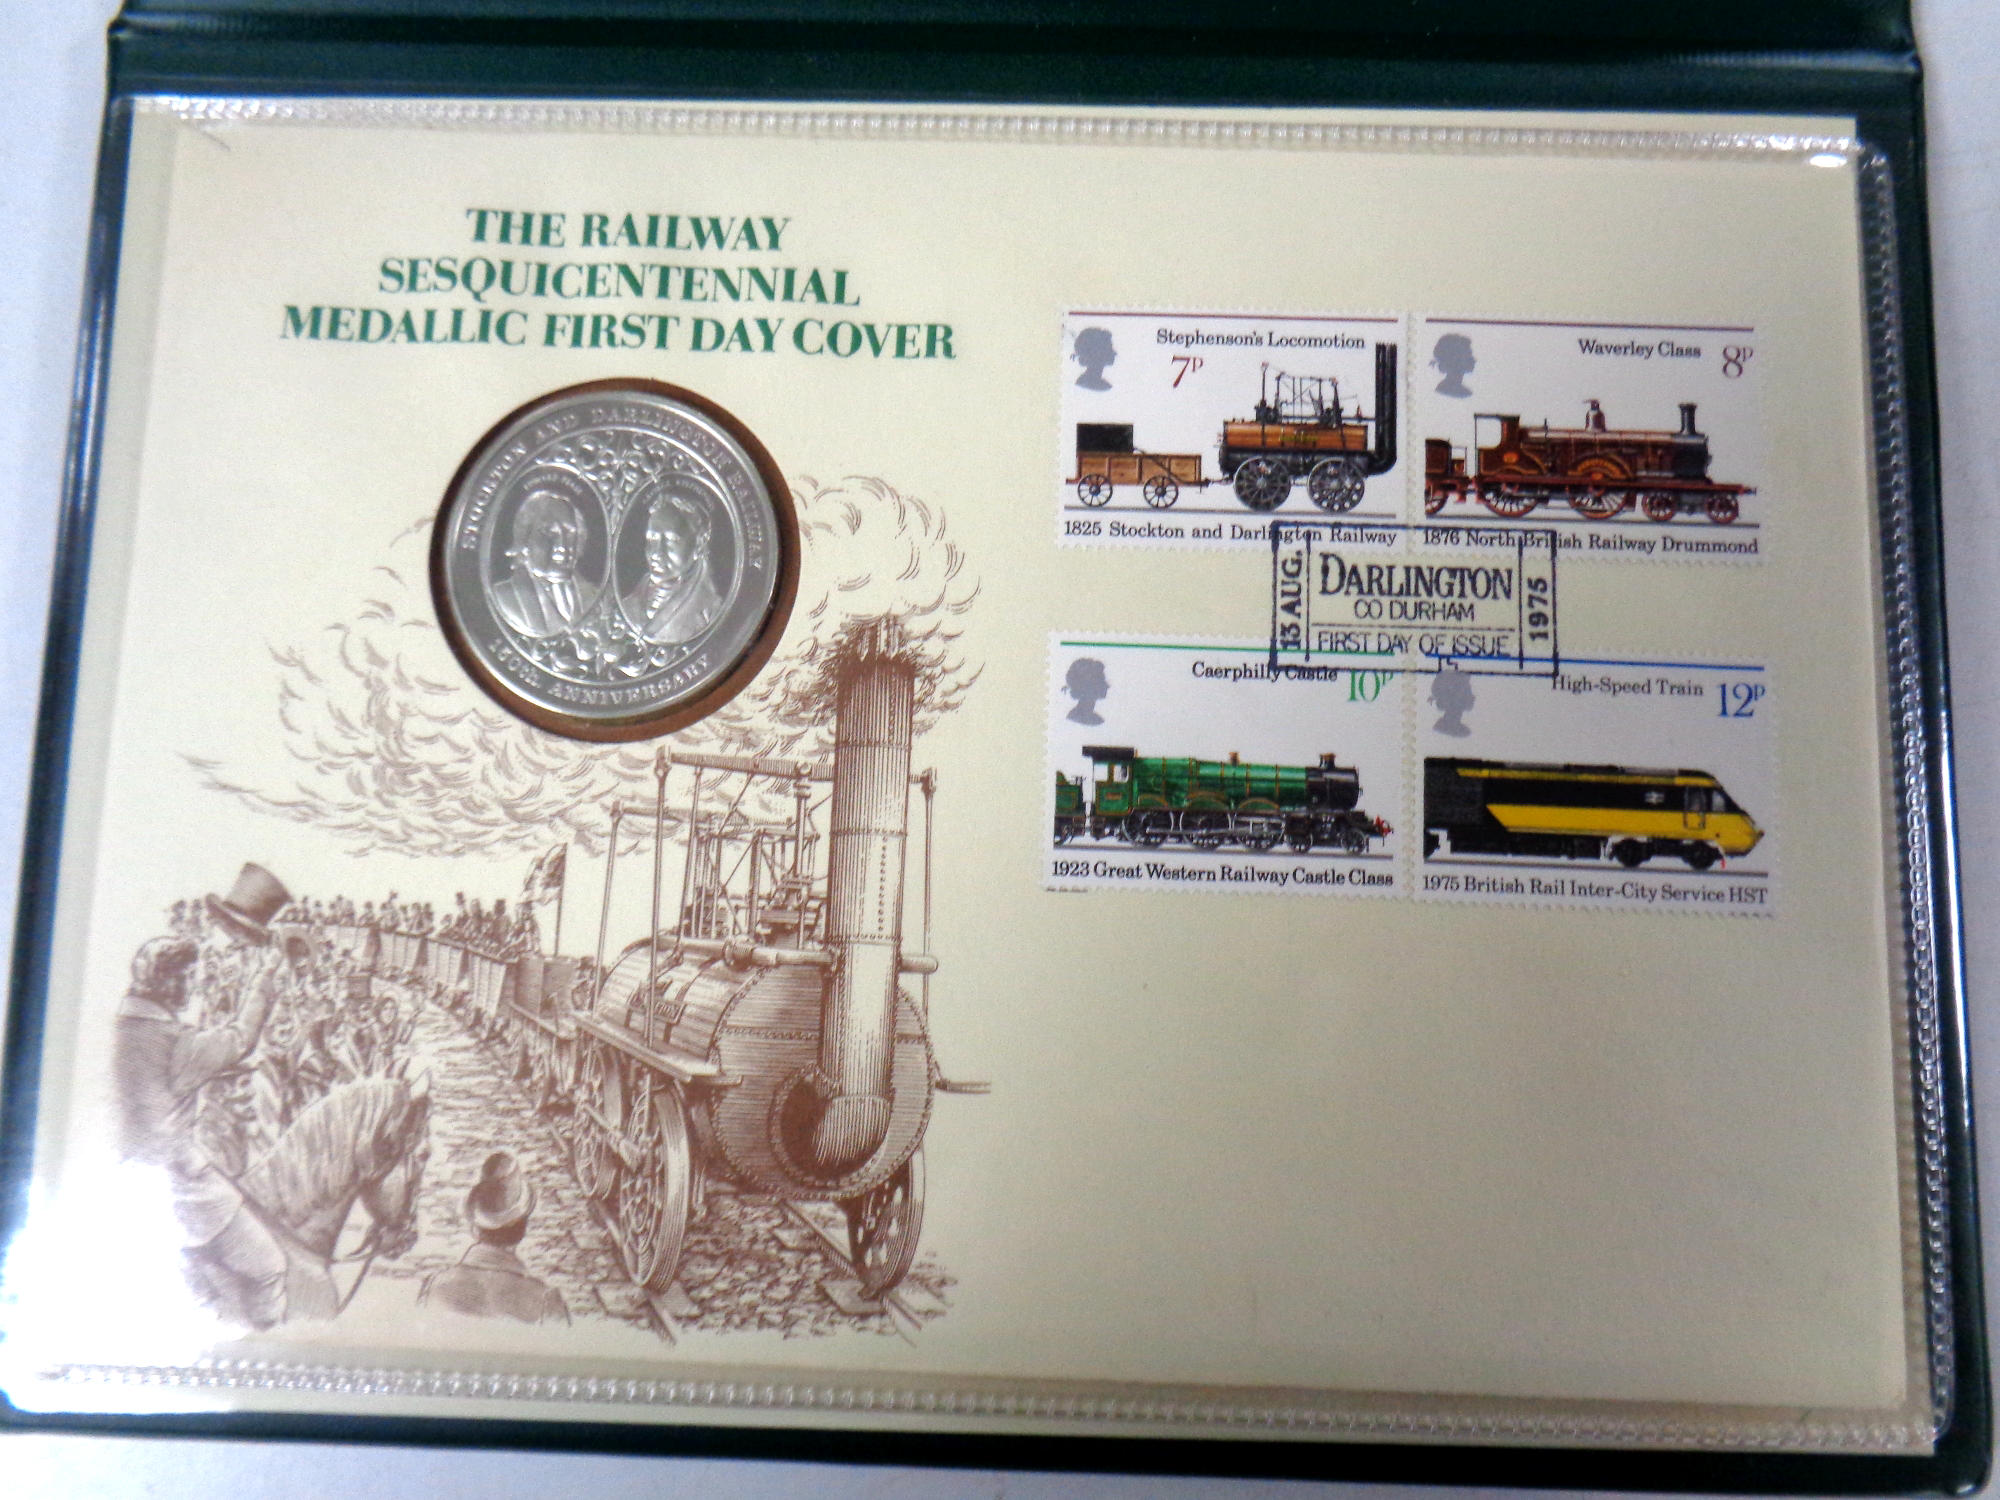 A Railway sesquicentennial medallic first day cover